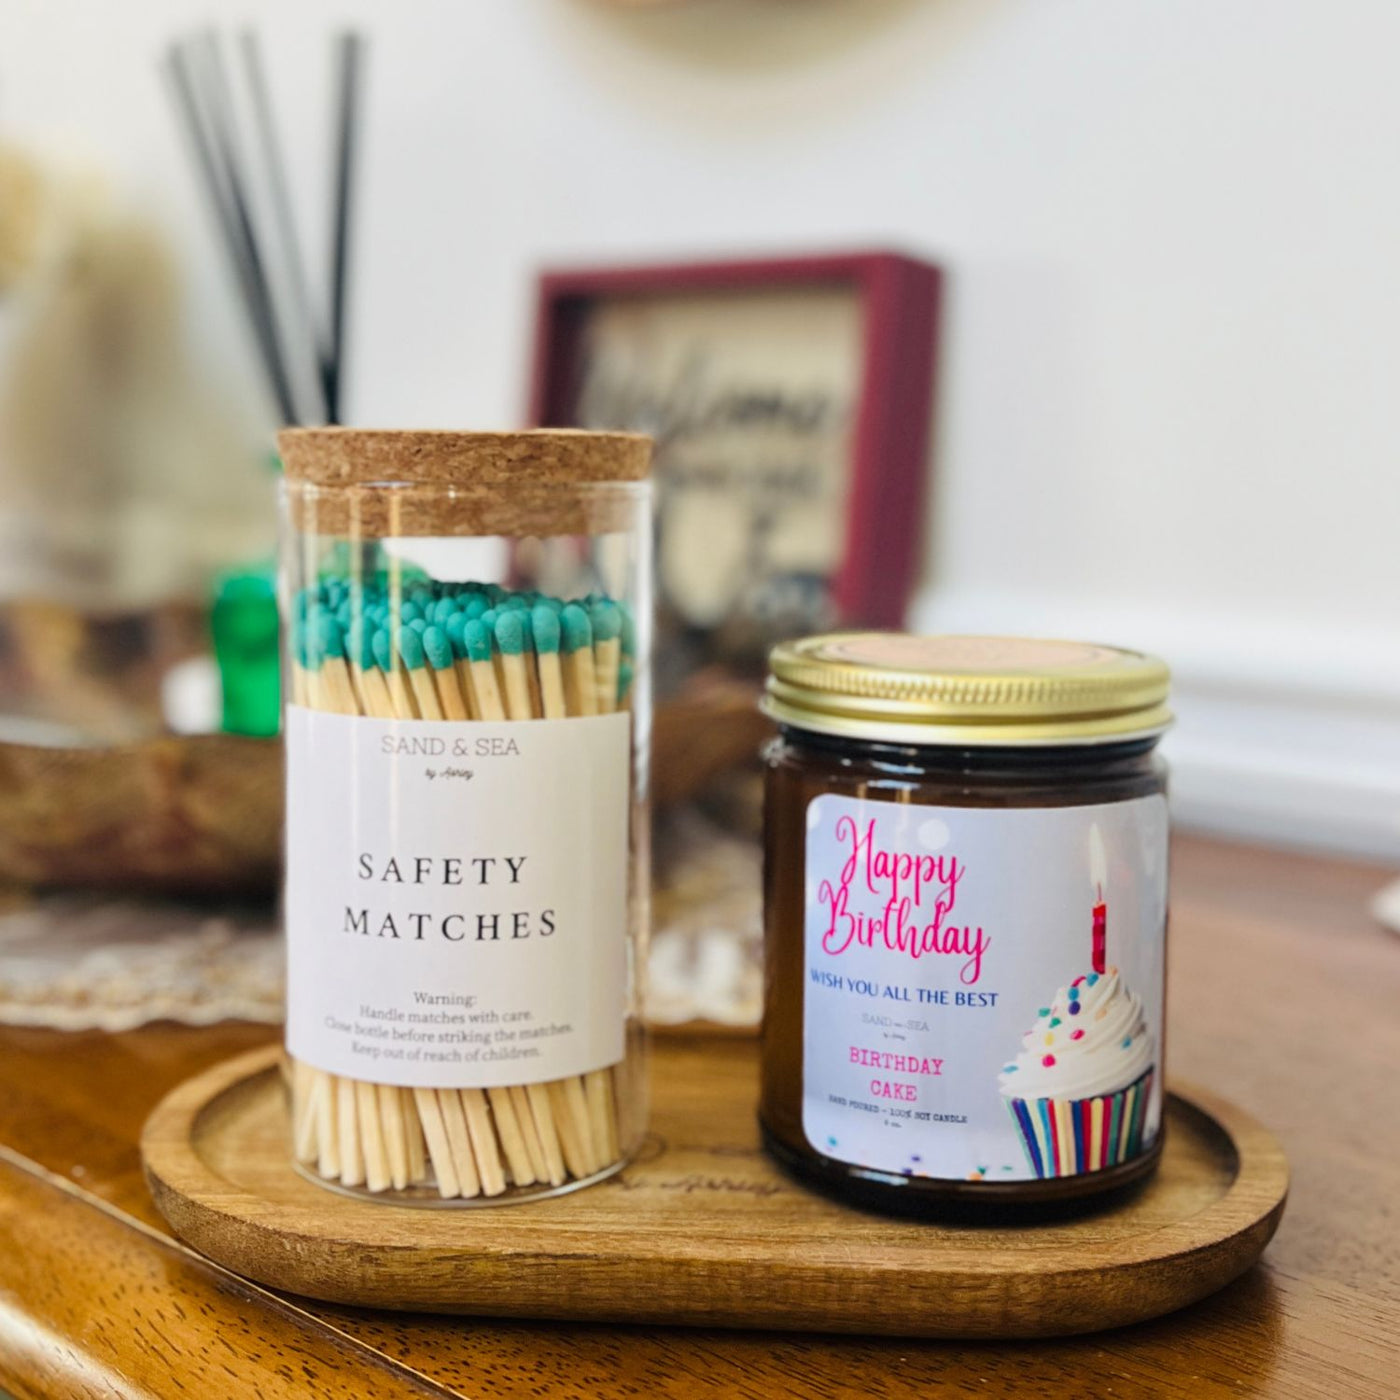 Birthday Candle Gift Sets - Happy Birthday Candle, Safety Matches, and Wooden Tray